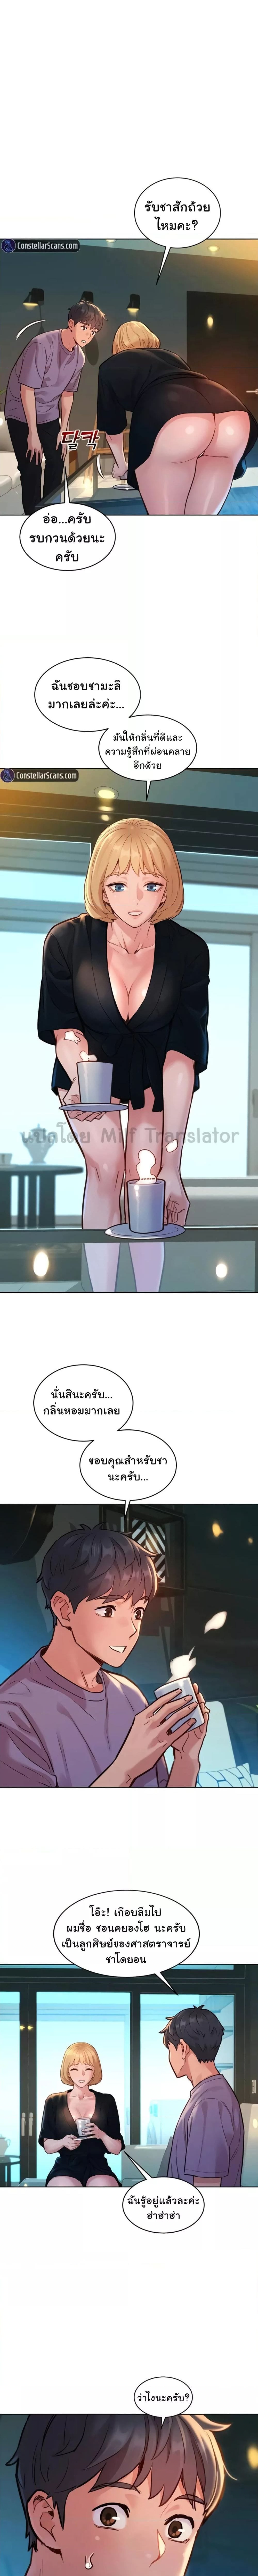 Let’s Hang Out from Today ตอนที่ 17 ภาพ 2